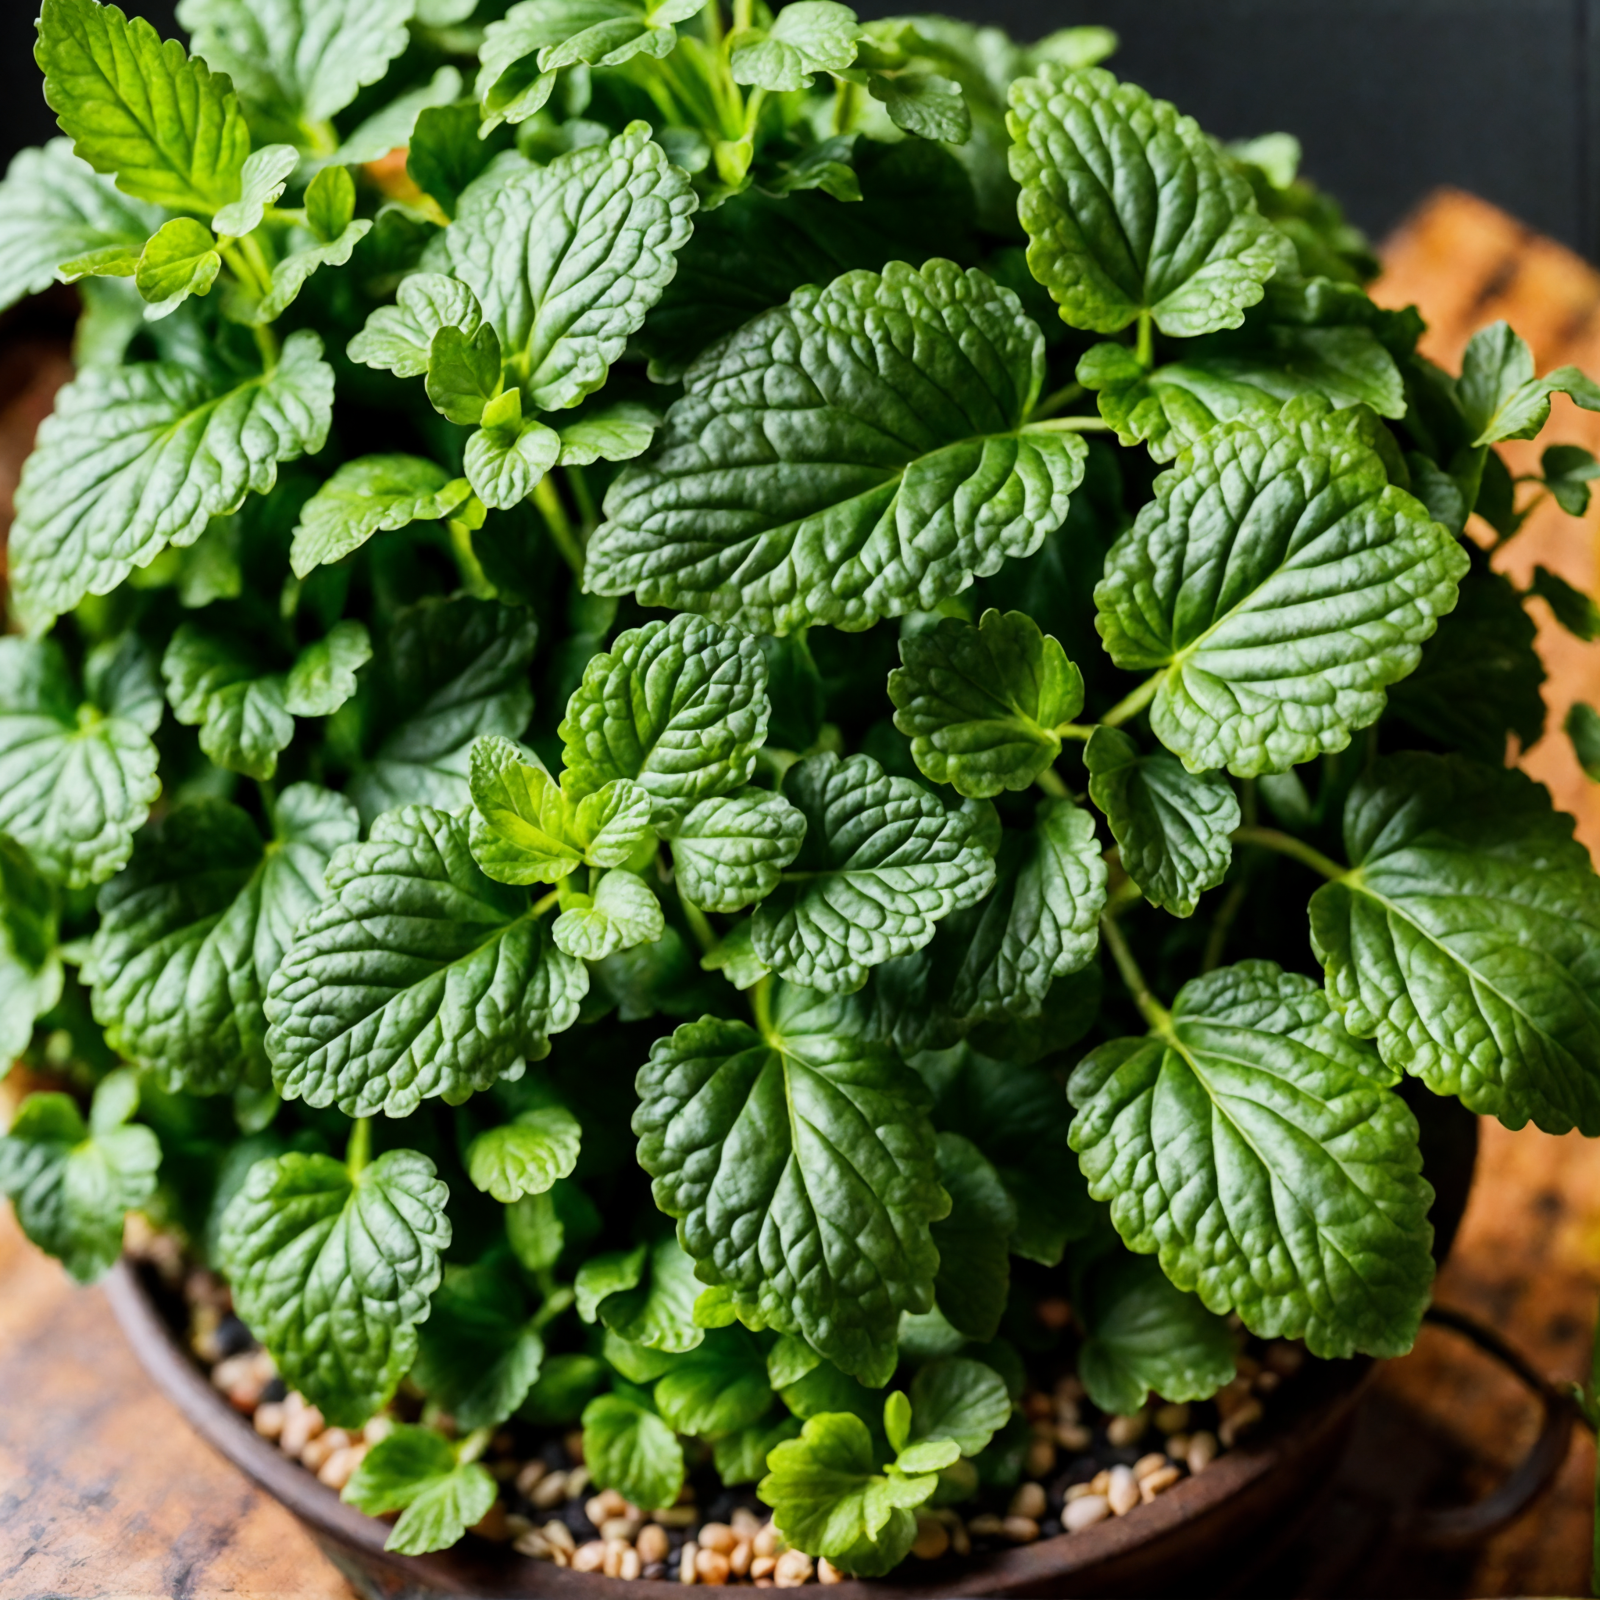 Melissa officinalis (lemon balm) in a bowl planter on a wooden table, clear lighting, dark background.